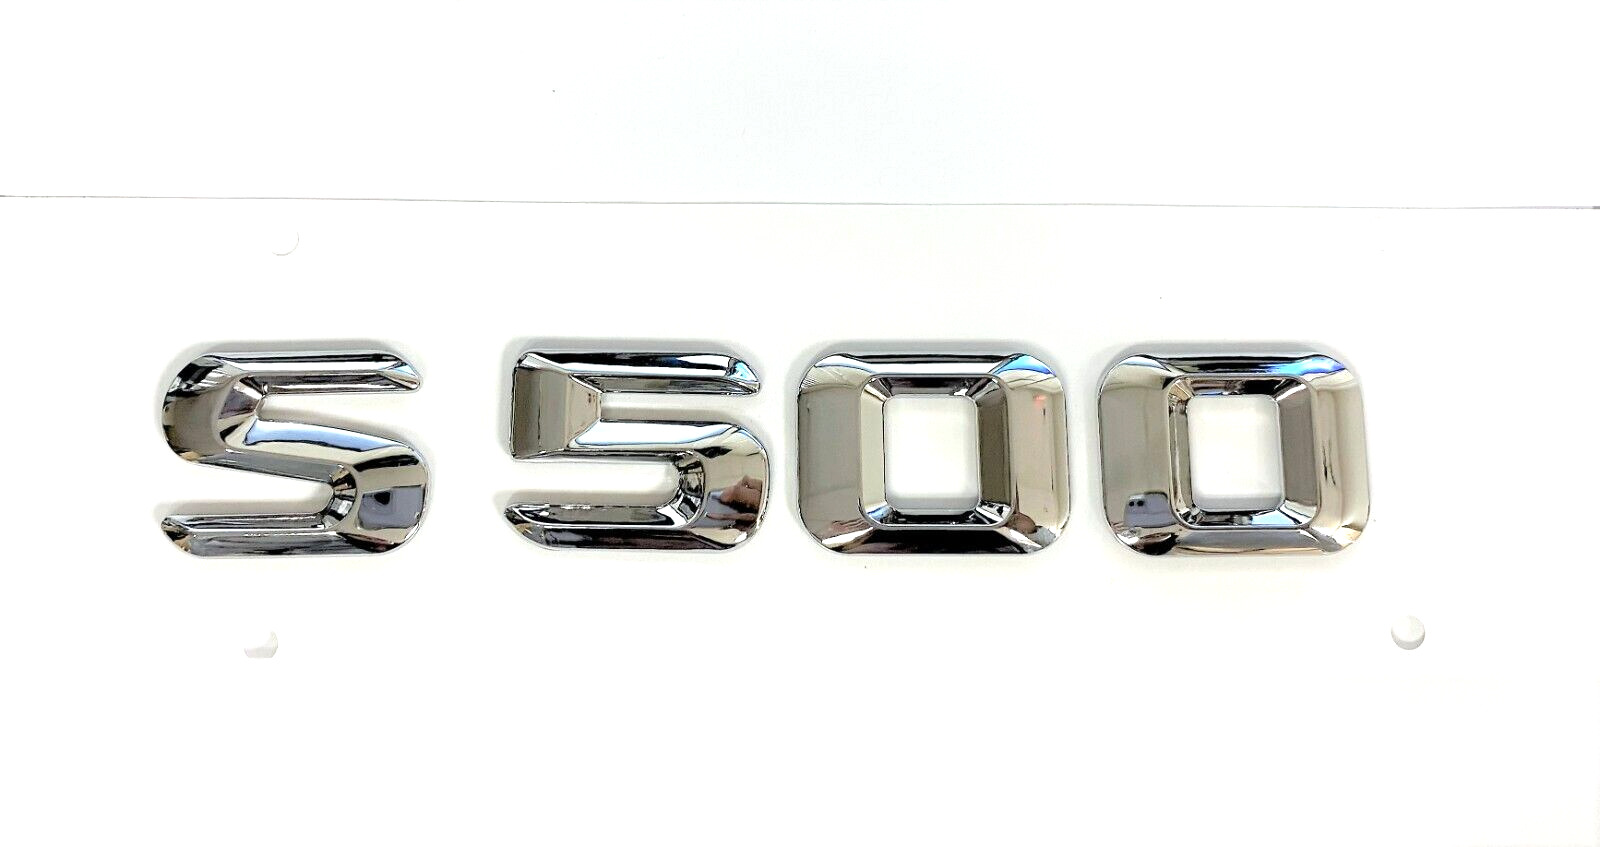 #1 S500 CHROME FIT MERCEDES REAR TRUNK EMBLEM BADGE NAMEPLATE DECAL LETTERS